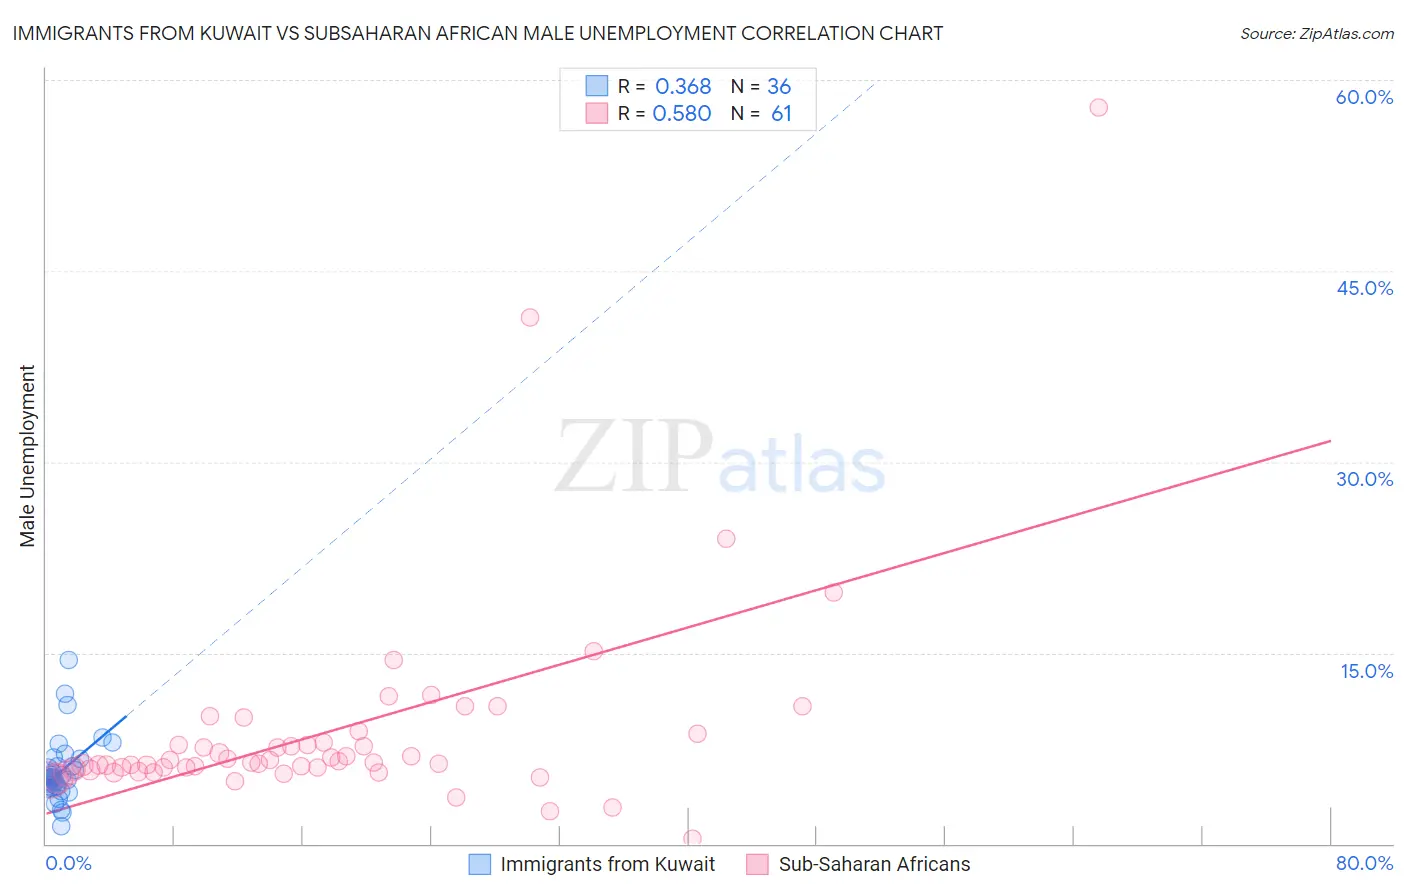 Immigrants from Kuwait vs Subsaharan African Male Unemployment